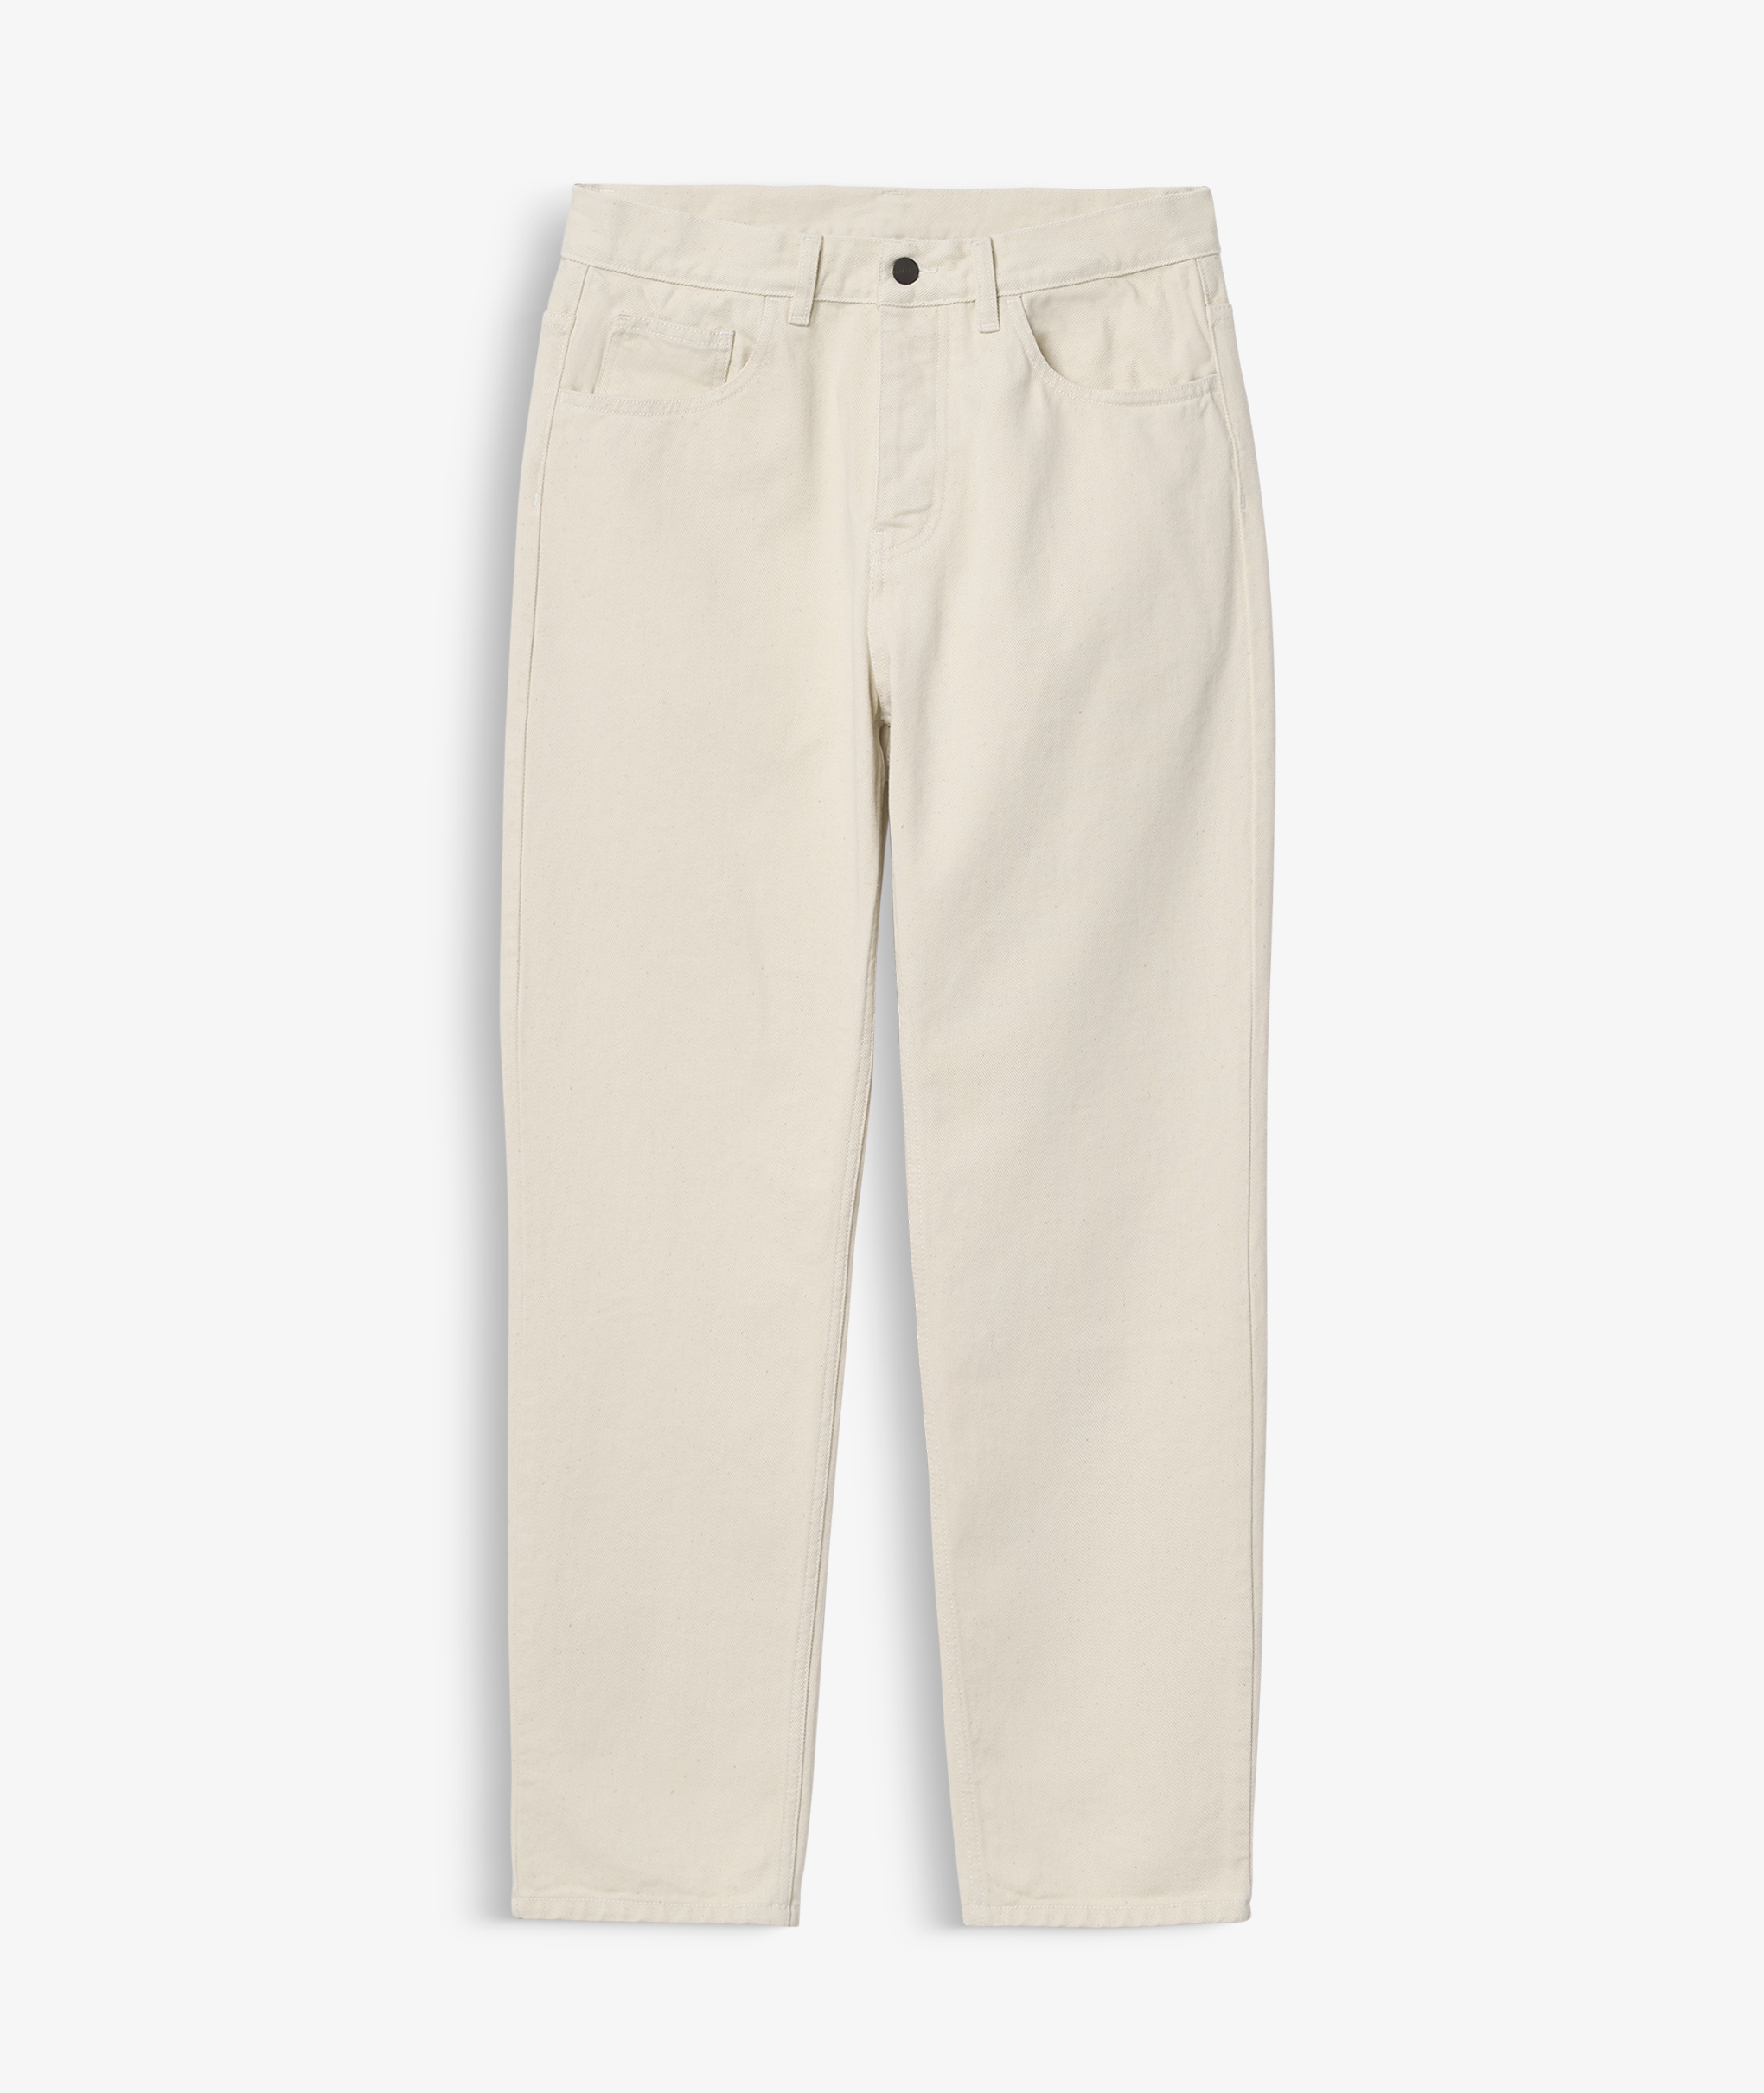 Norse Store | Shipping Worldwide - Carhartt Newel Pant - Natural Stone Wash